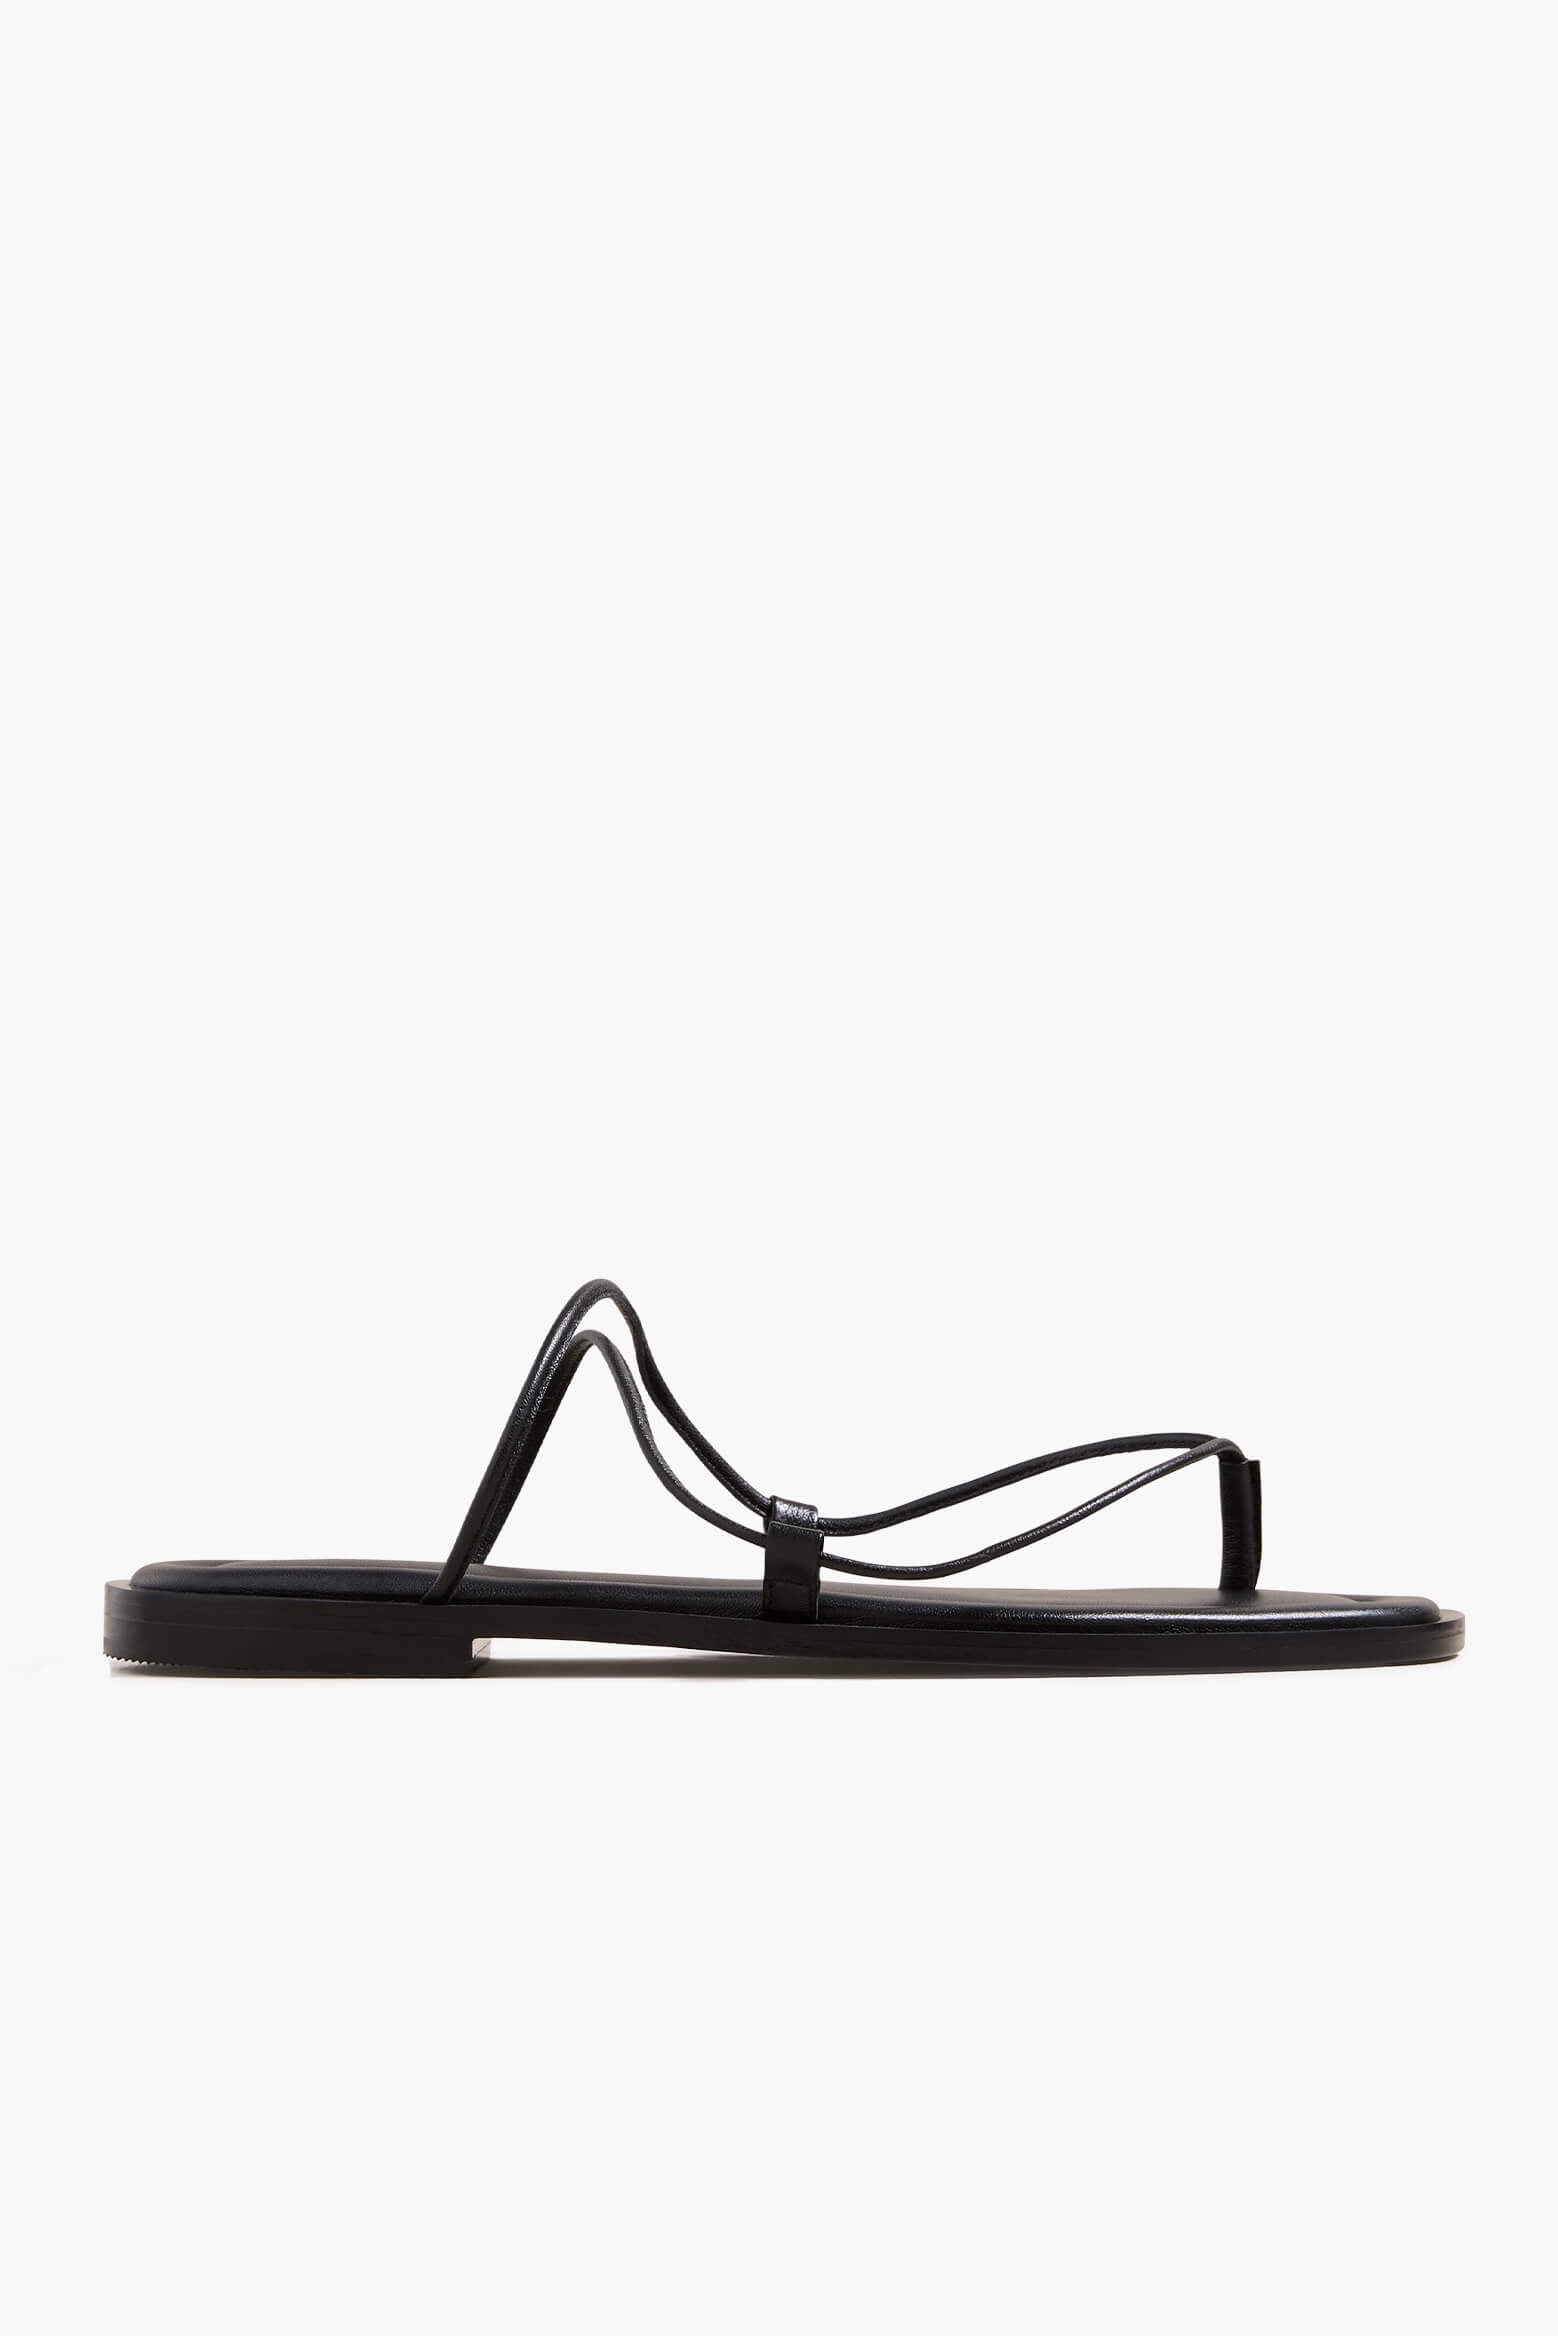 A.Emery Nodi Sandal in Black available at The New Trend Australia.